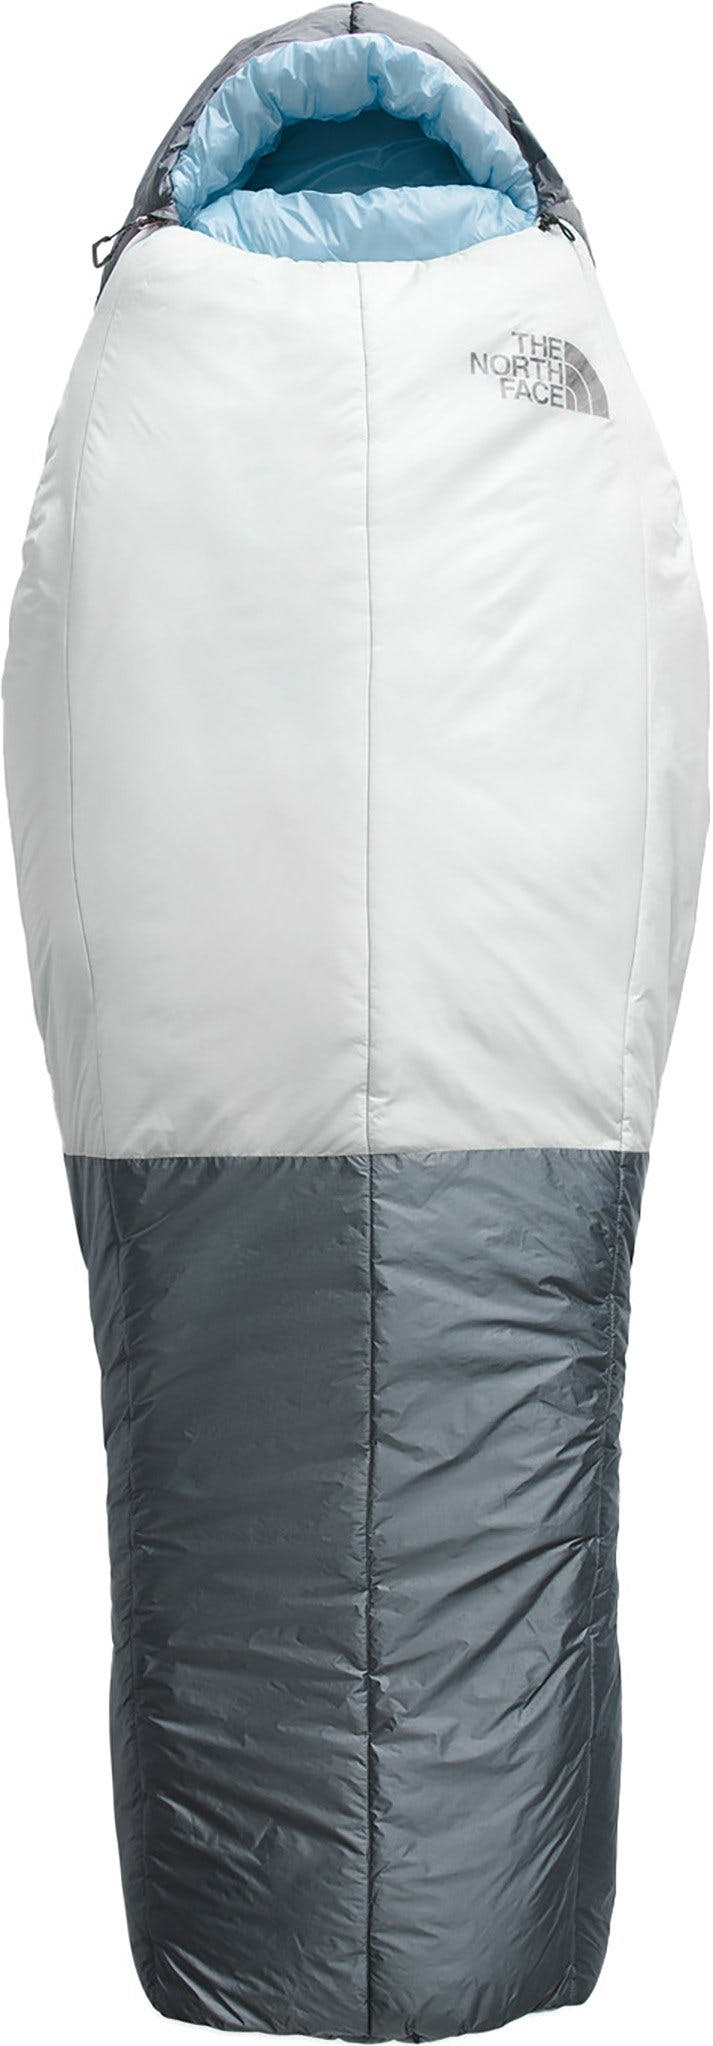 Product image for Cat’s Meow Eco 20°F/-7°C Sleeping Bag - Women's